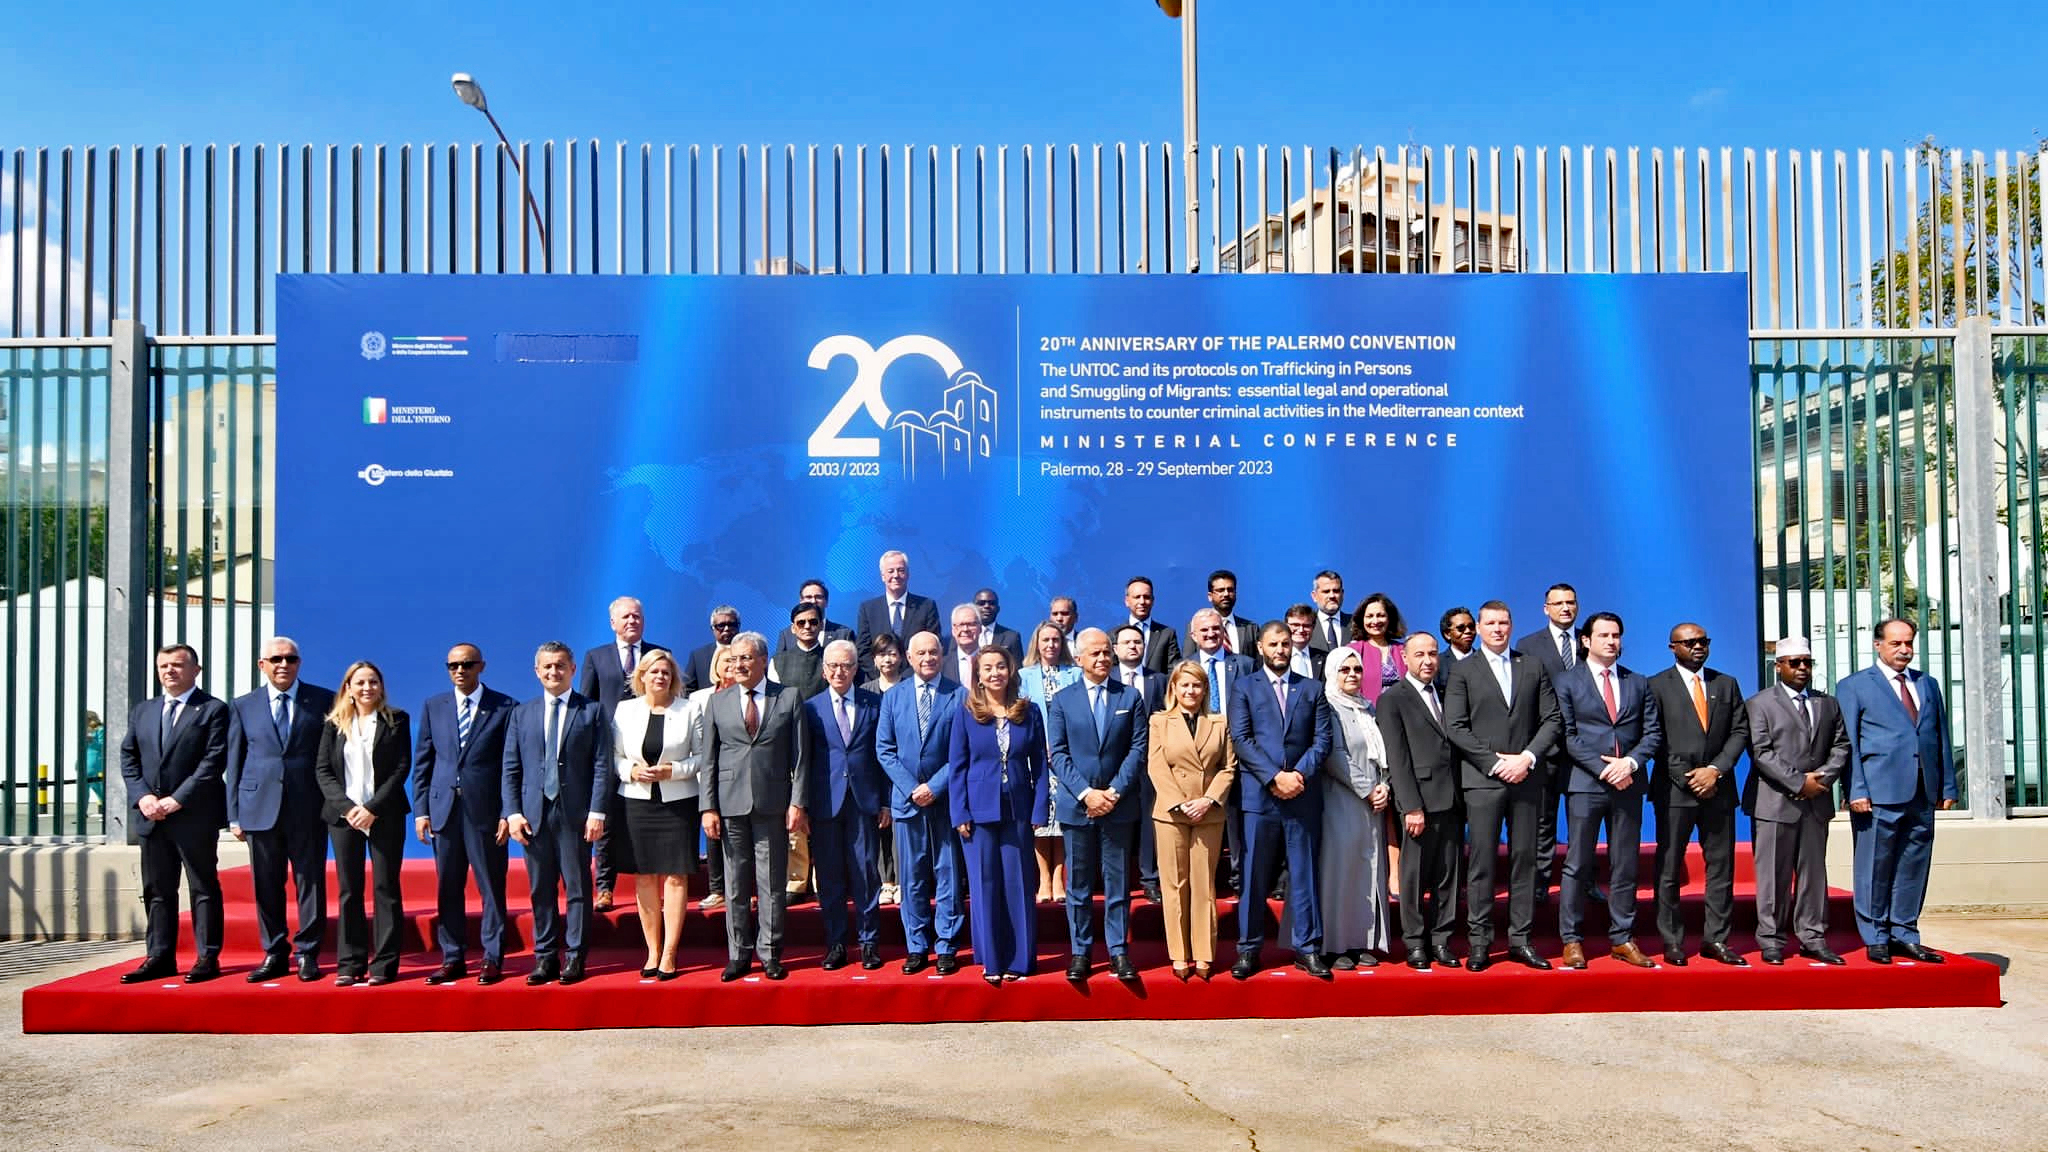 A group photo taken outside a building arranged in three rows. In the background, a banner with text reading "20th Anniversary of the Palermo Convention - The UNTOC and its protocols on Trafficking in Persons and Smuggling of Migrants: essential legal and operational instruments to counter criminal activities in the Mediterranean context - Ministerial Conference - Palermo, 28-29 September 2023".